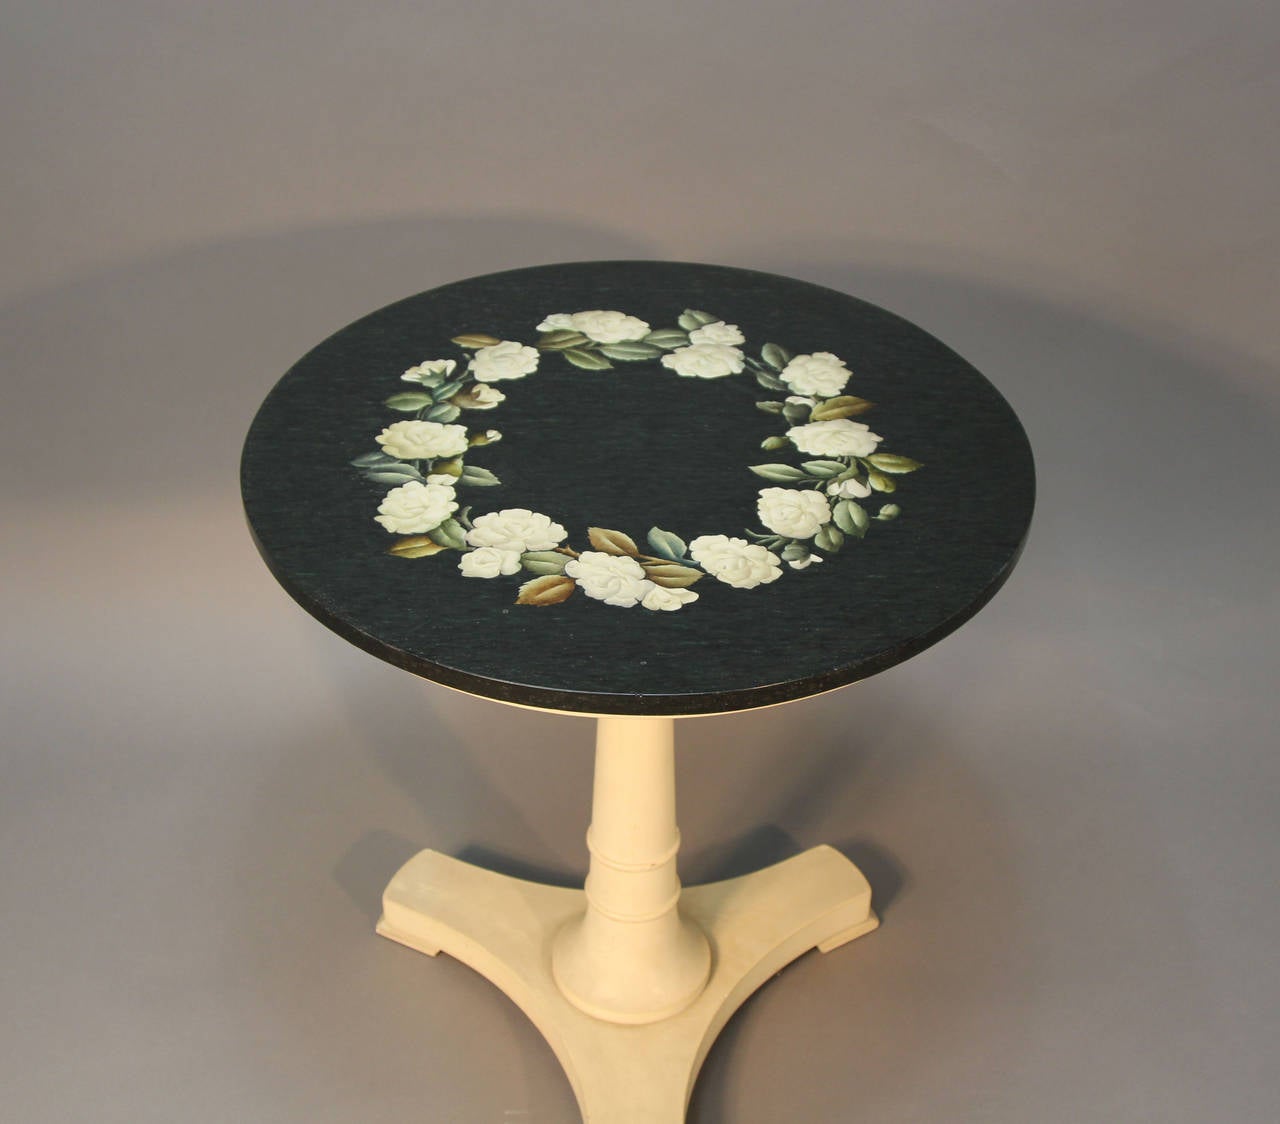 Jacques Bodart Pietra Dura Table Top with Floral Design on White Wood Base In Good Condition For Sale In Bridport, CT